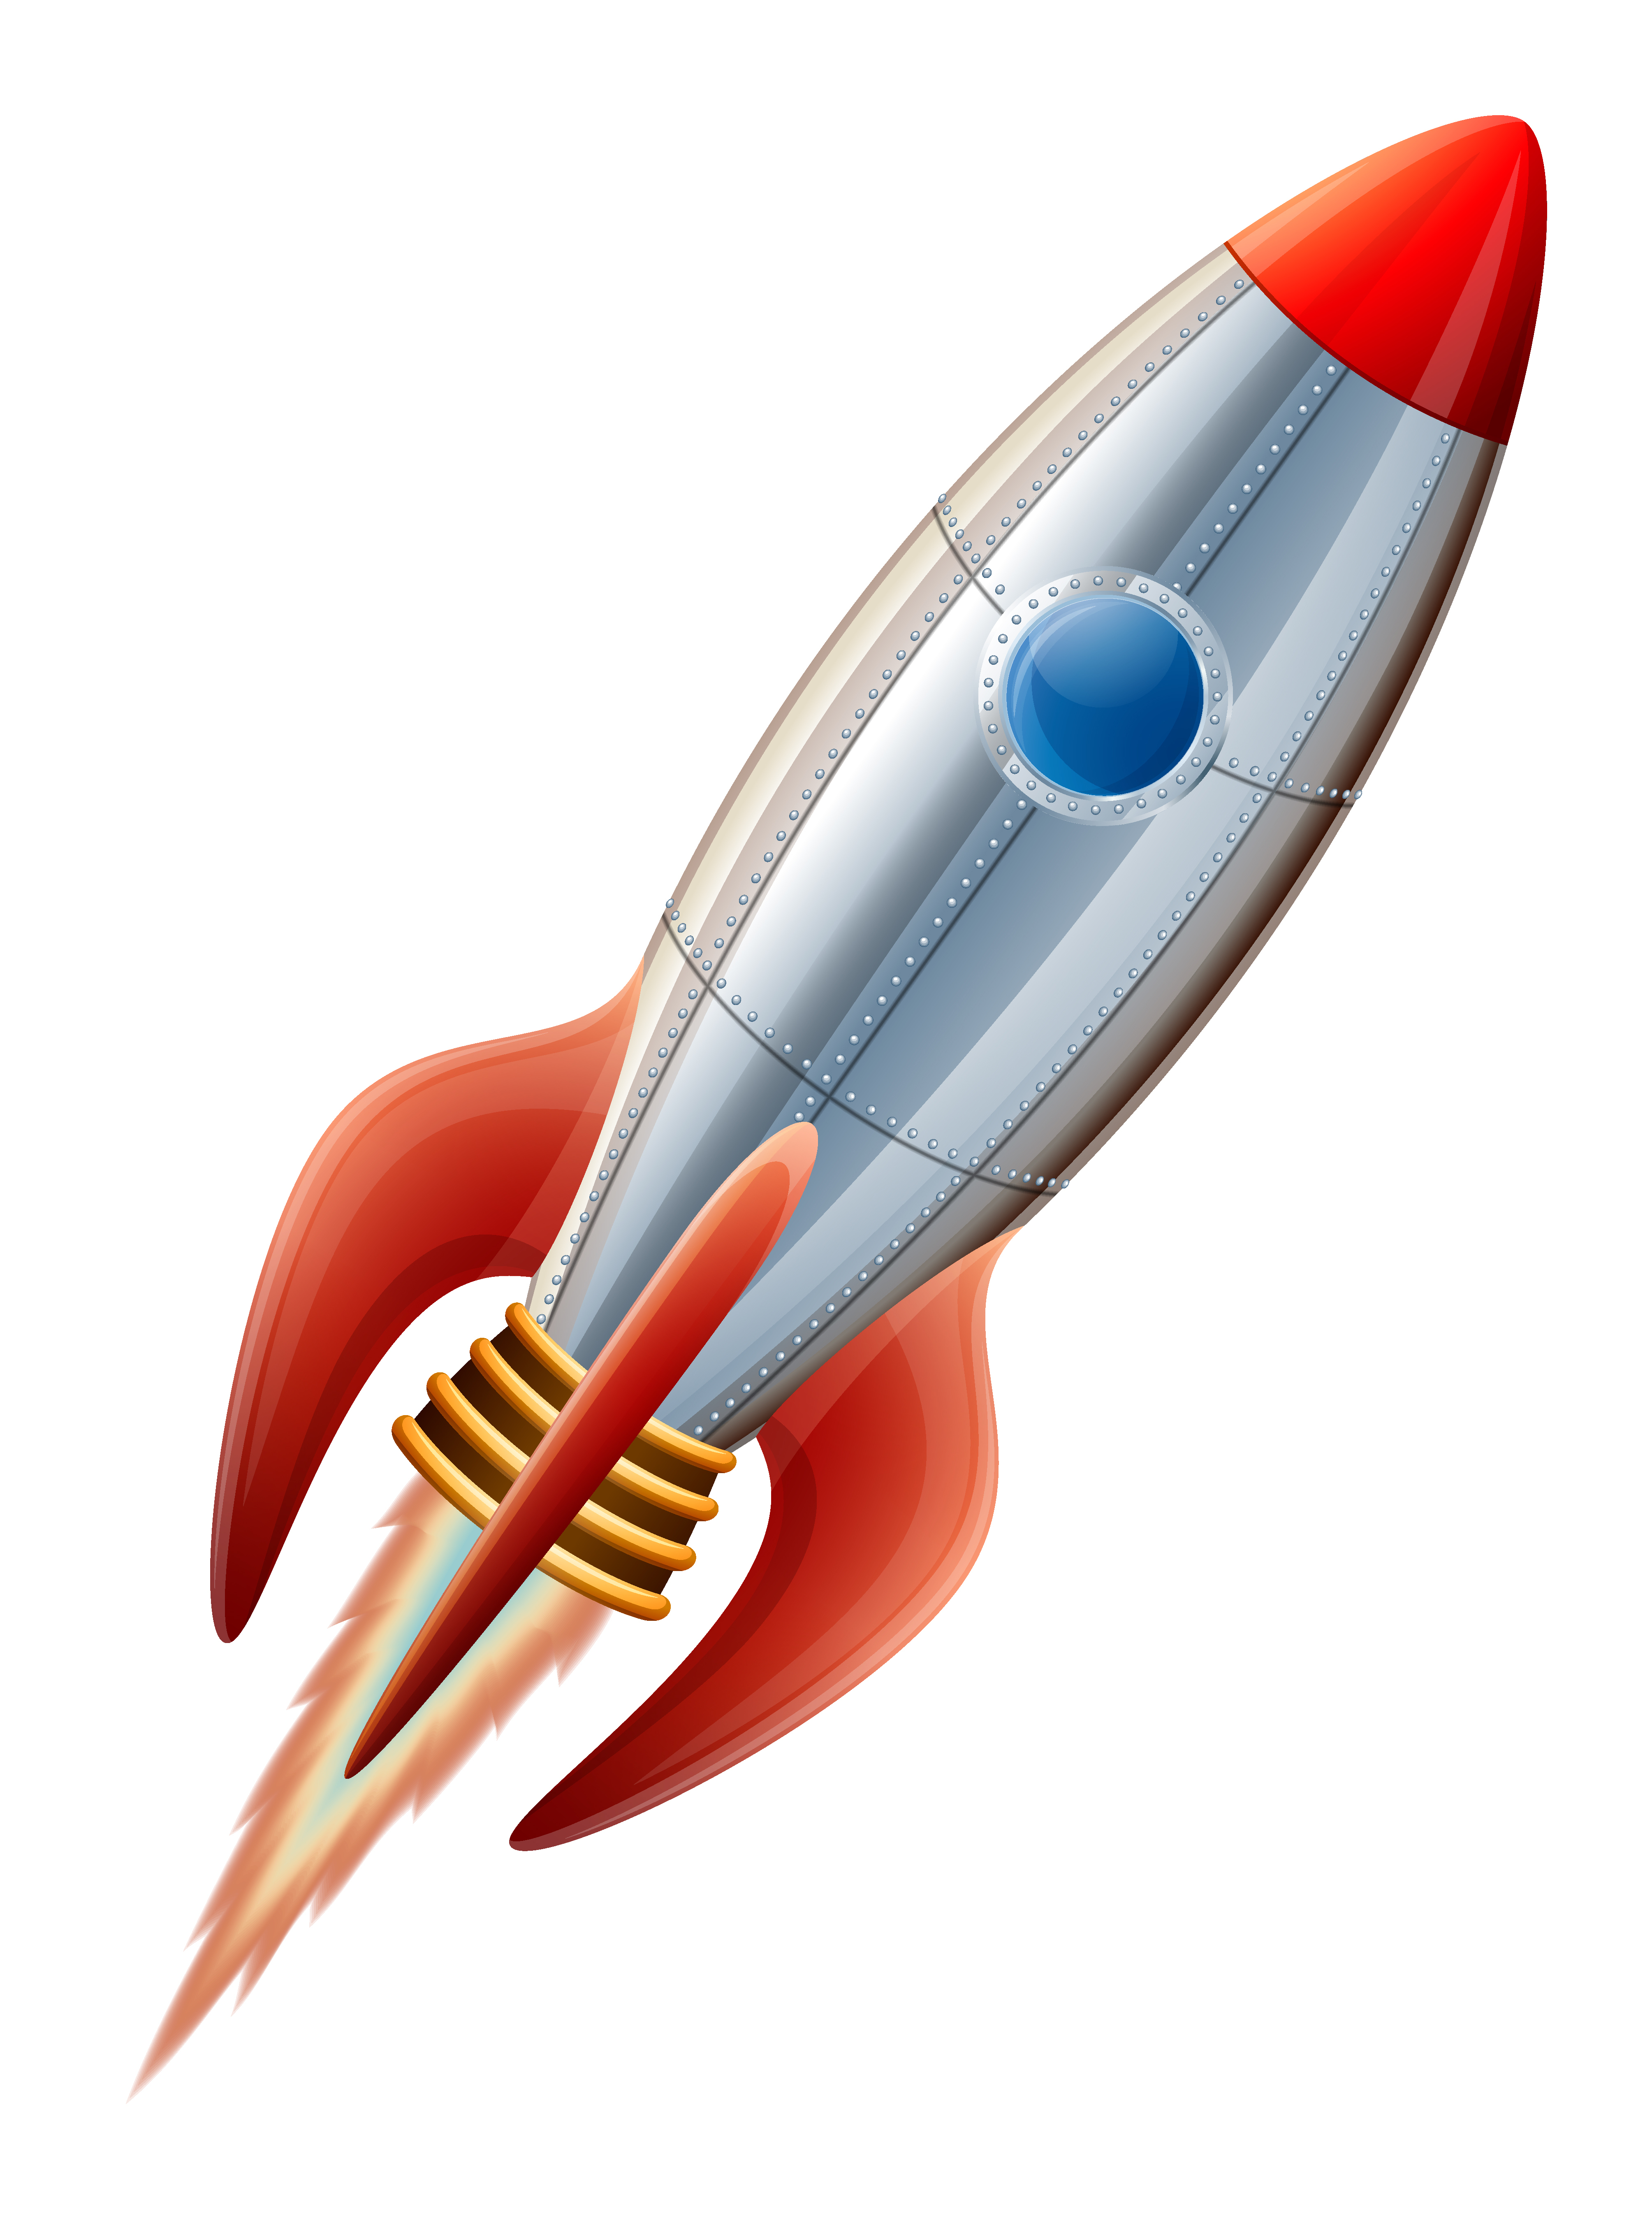 Animated Moving Rocket Ship - ClipArt Best